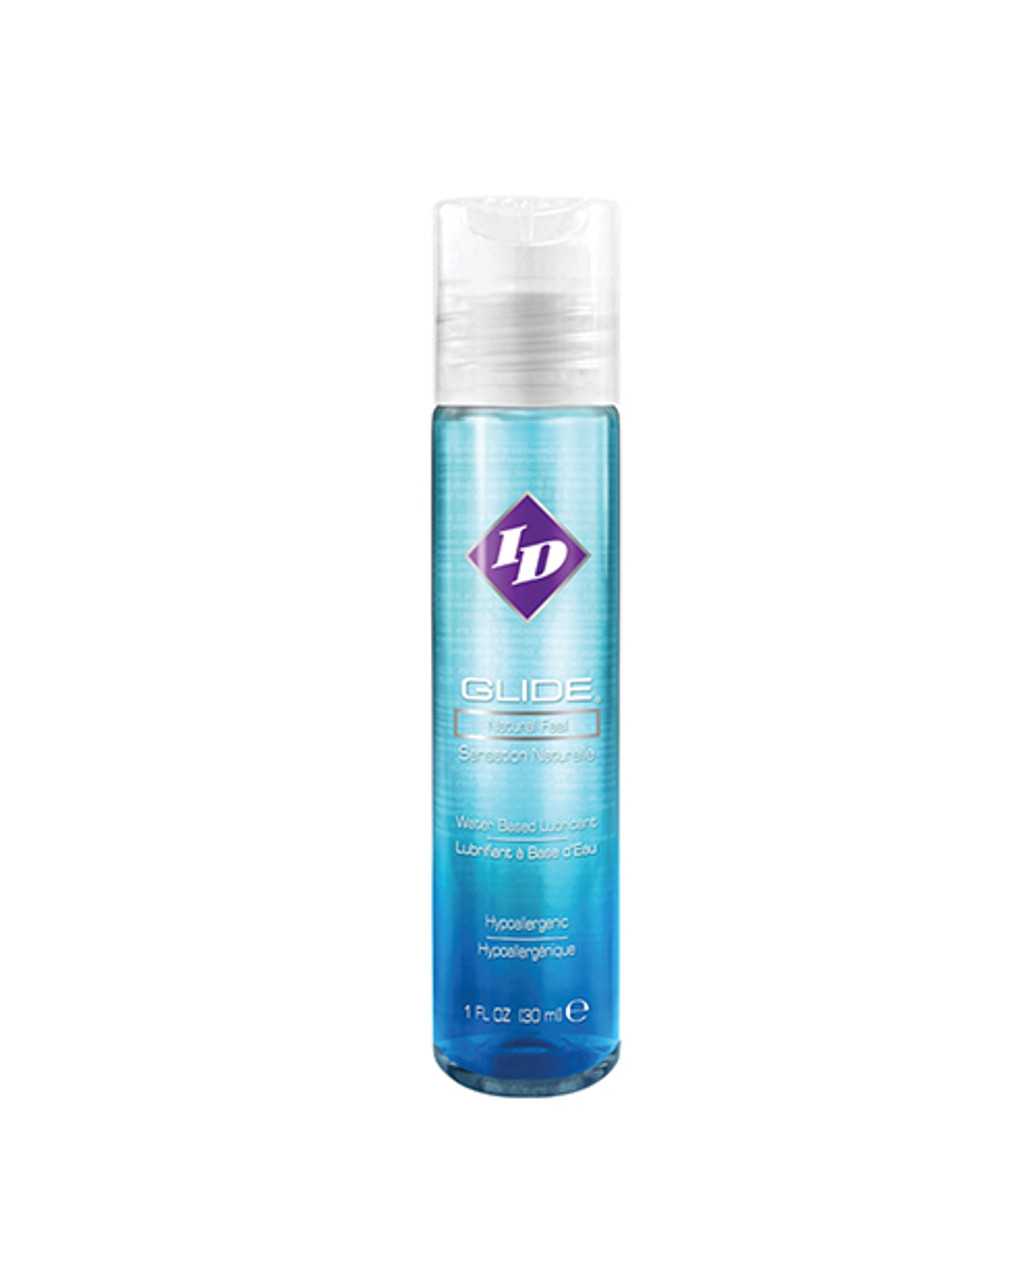 ID Glide Natural Feel Water Based Lubricant